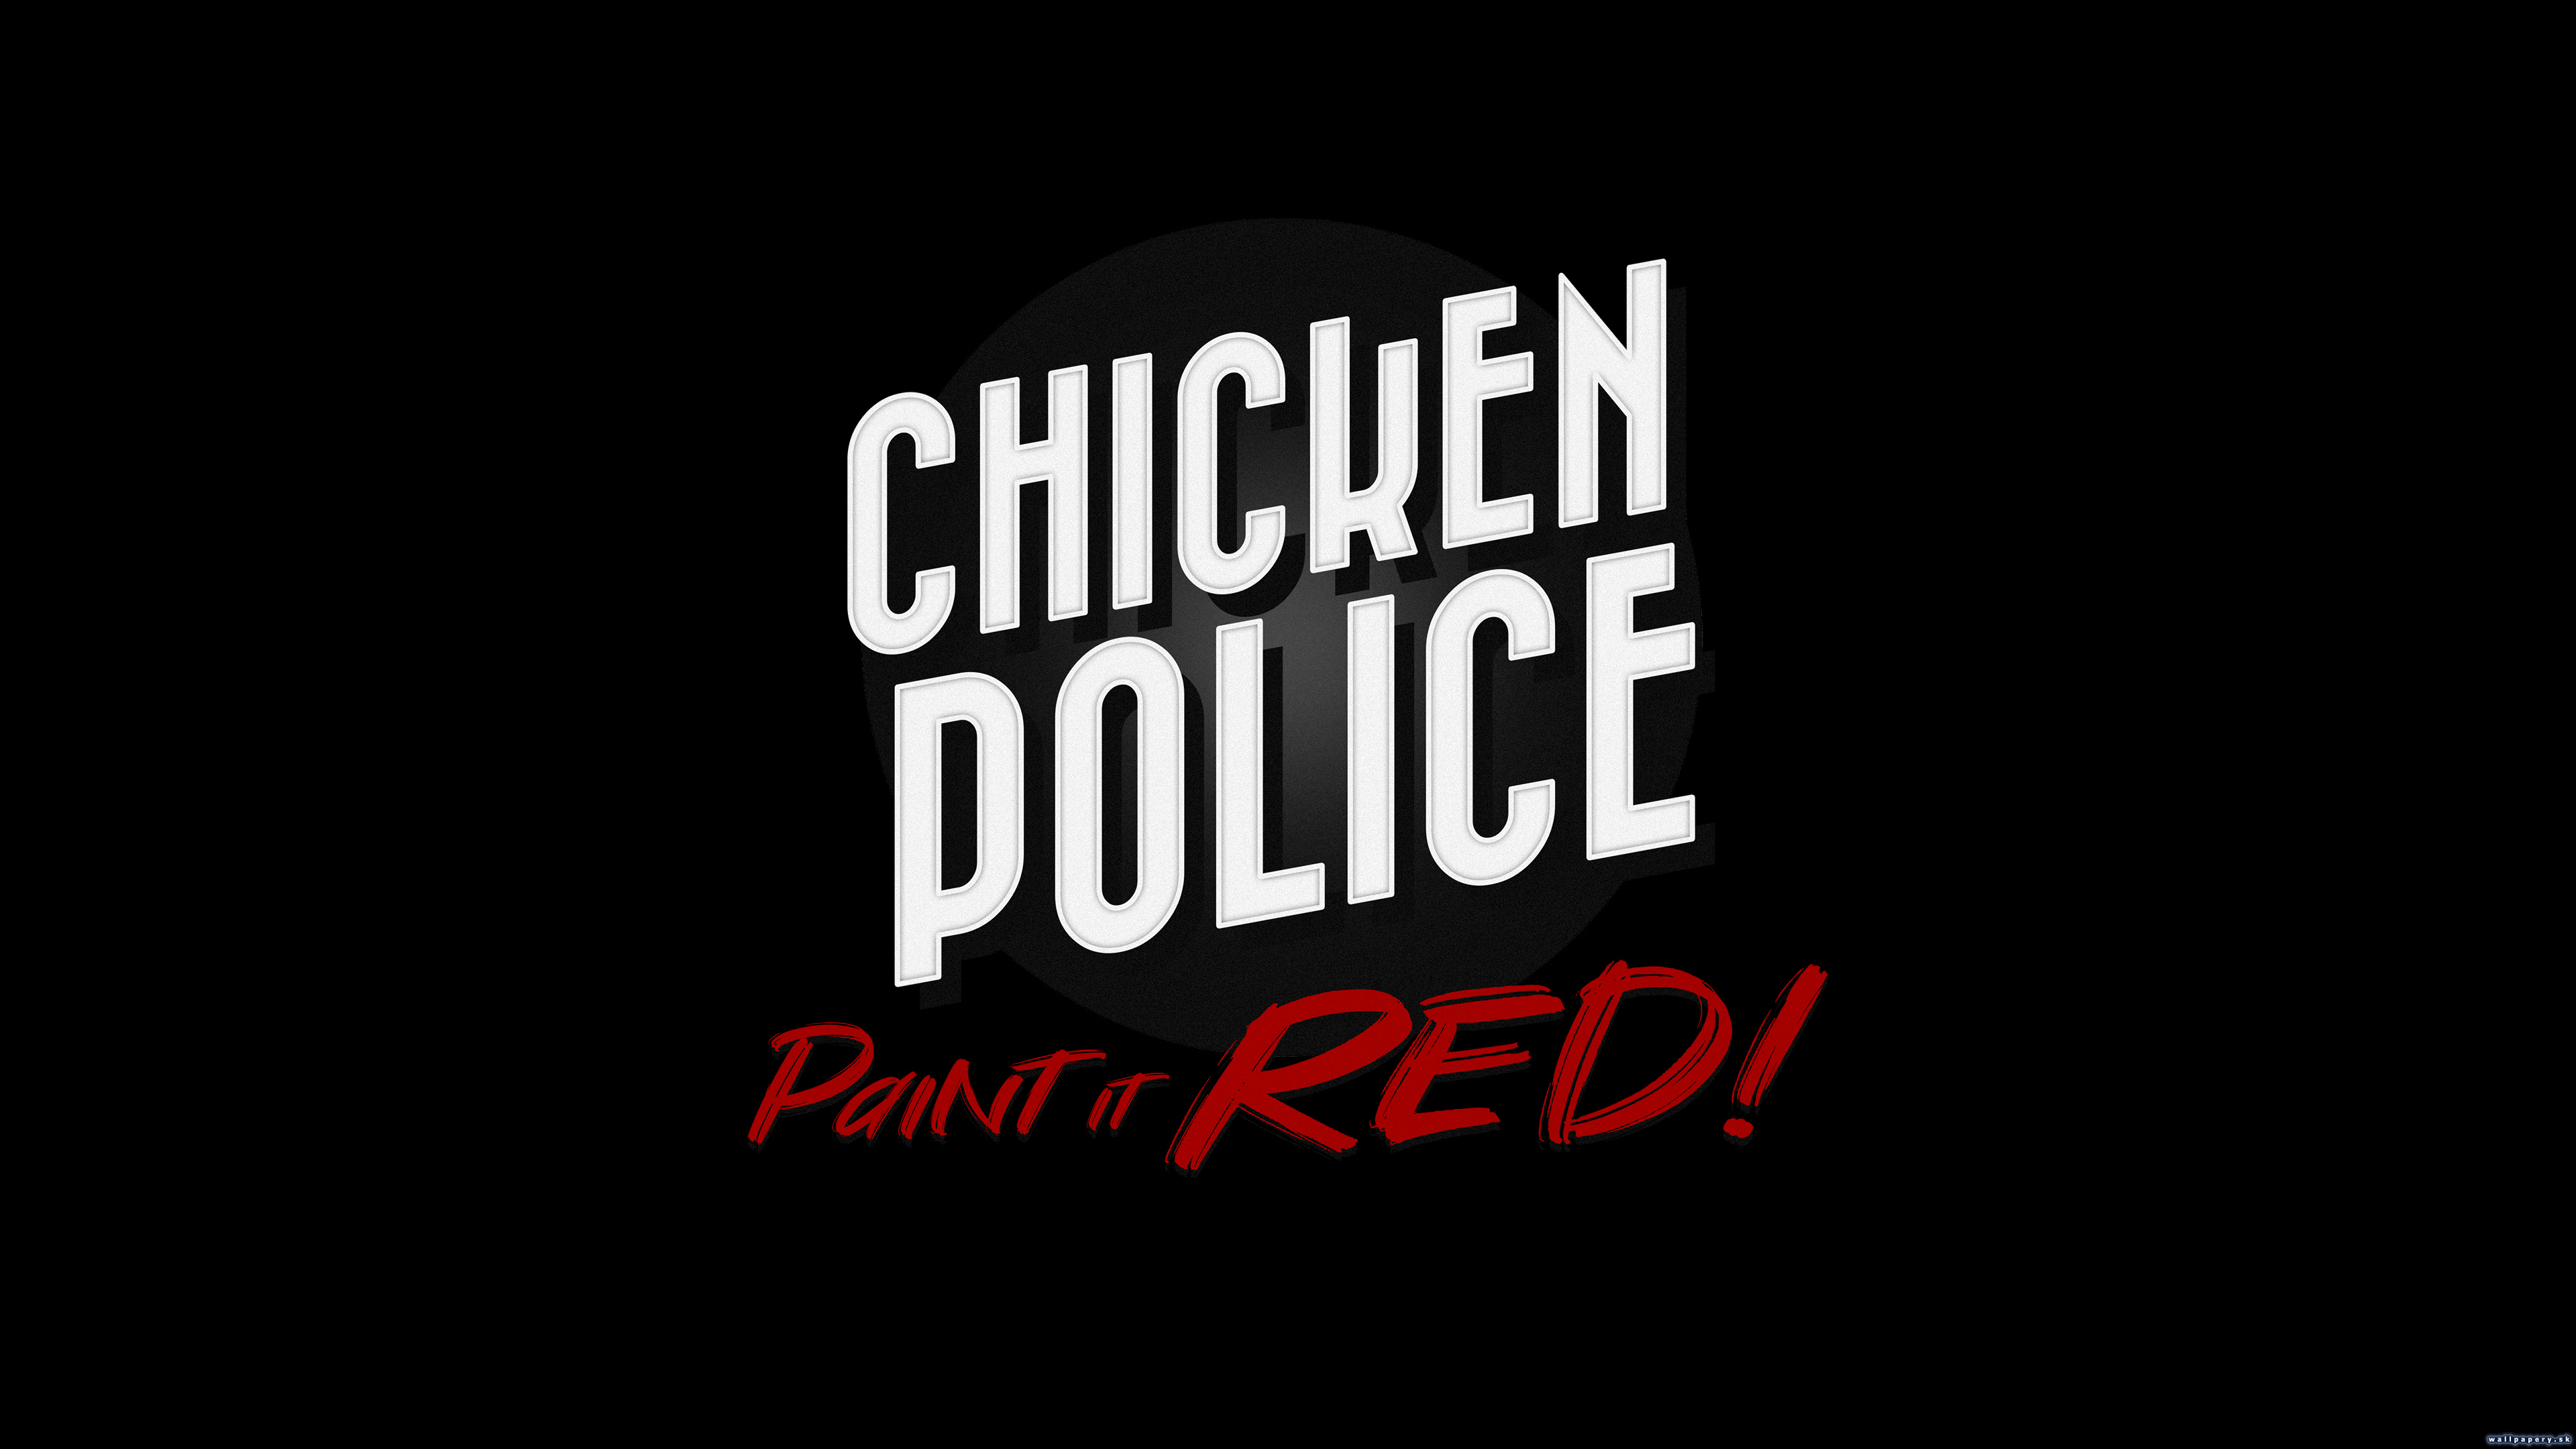 Chicken Police: Paint it RED! - wallpaper 3